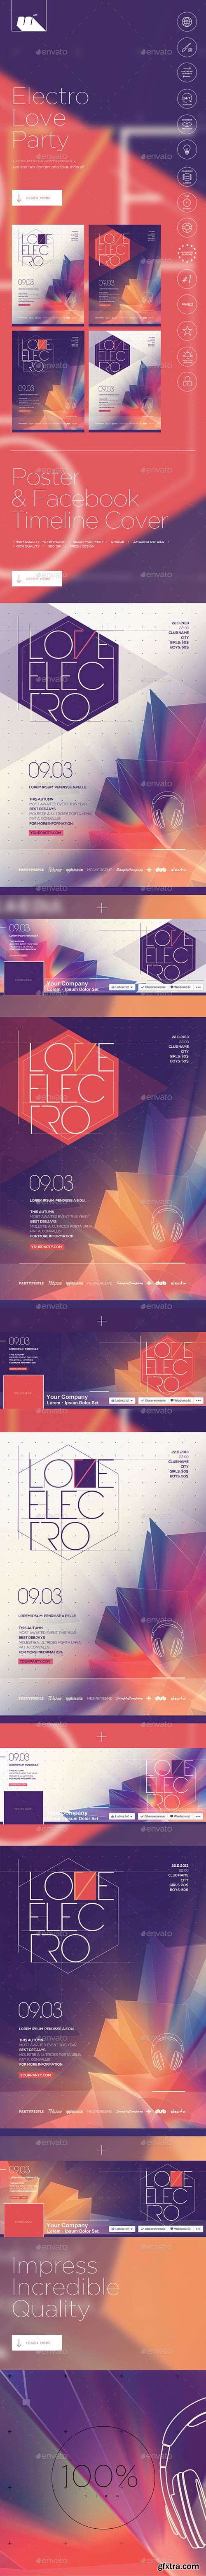 GraphicRiver - Love Electro Poster/Flyer